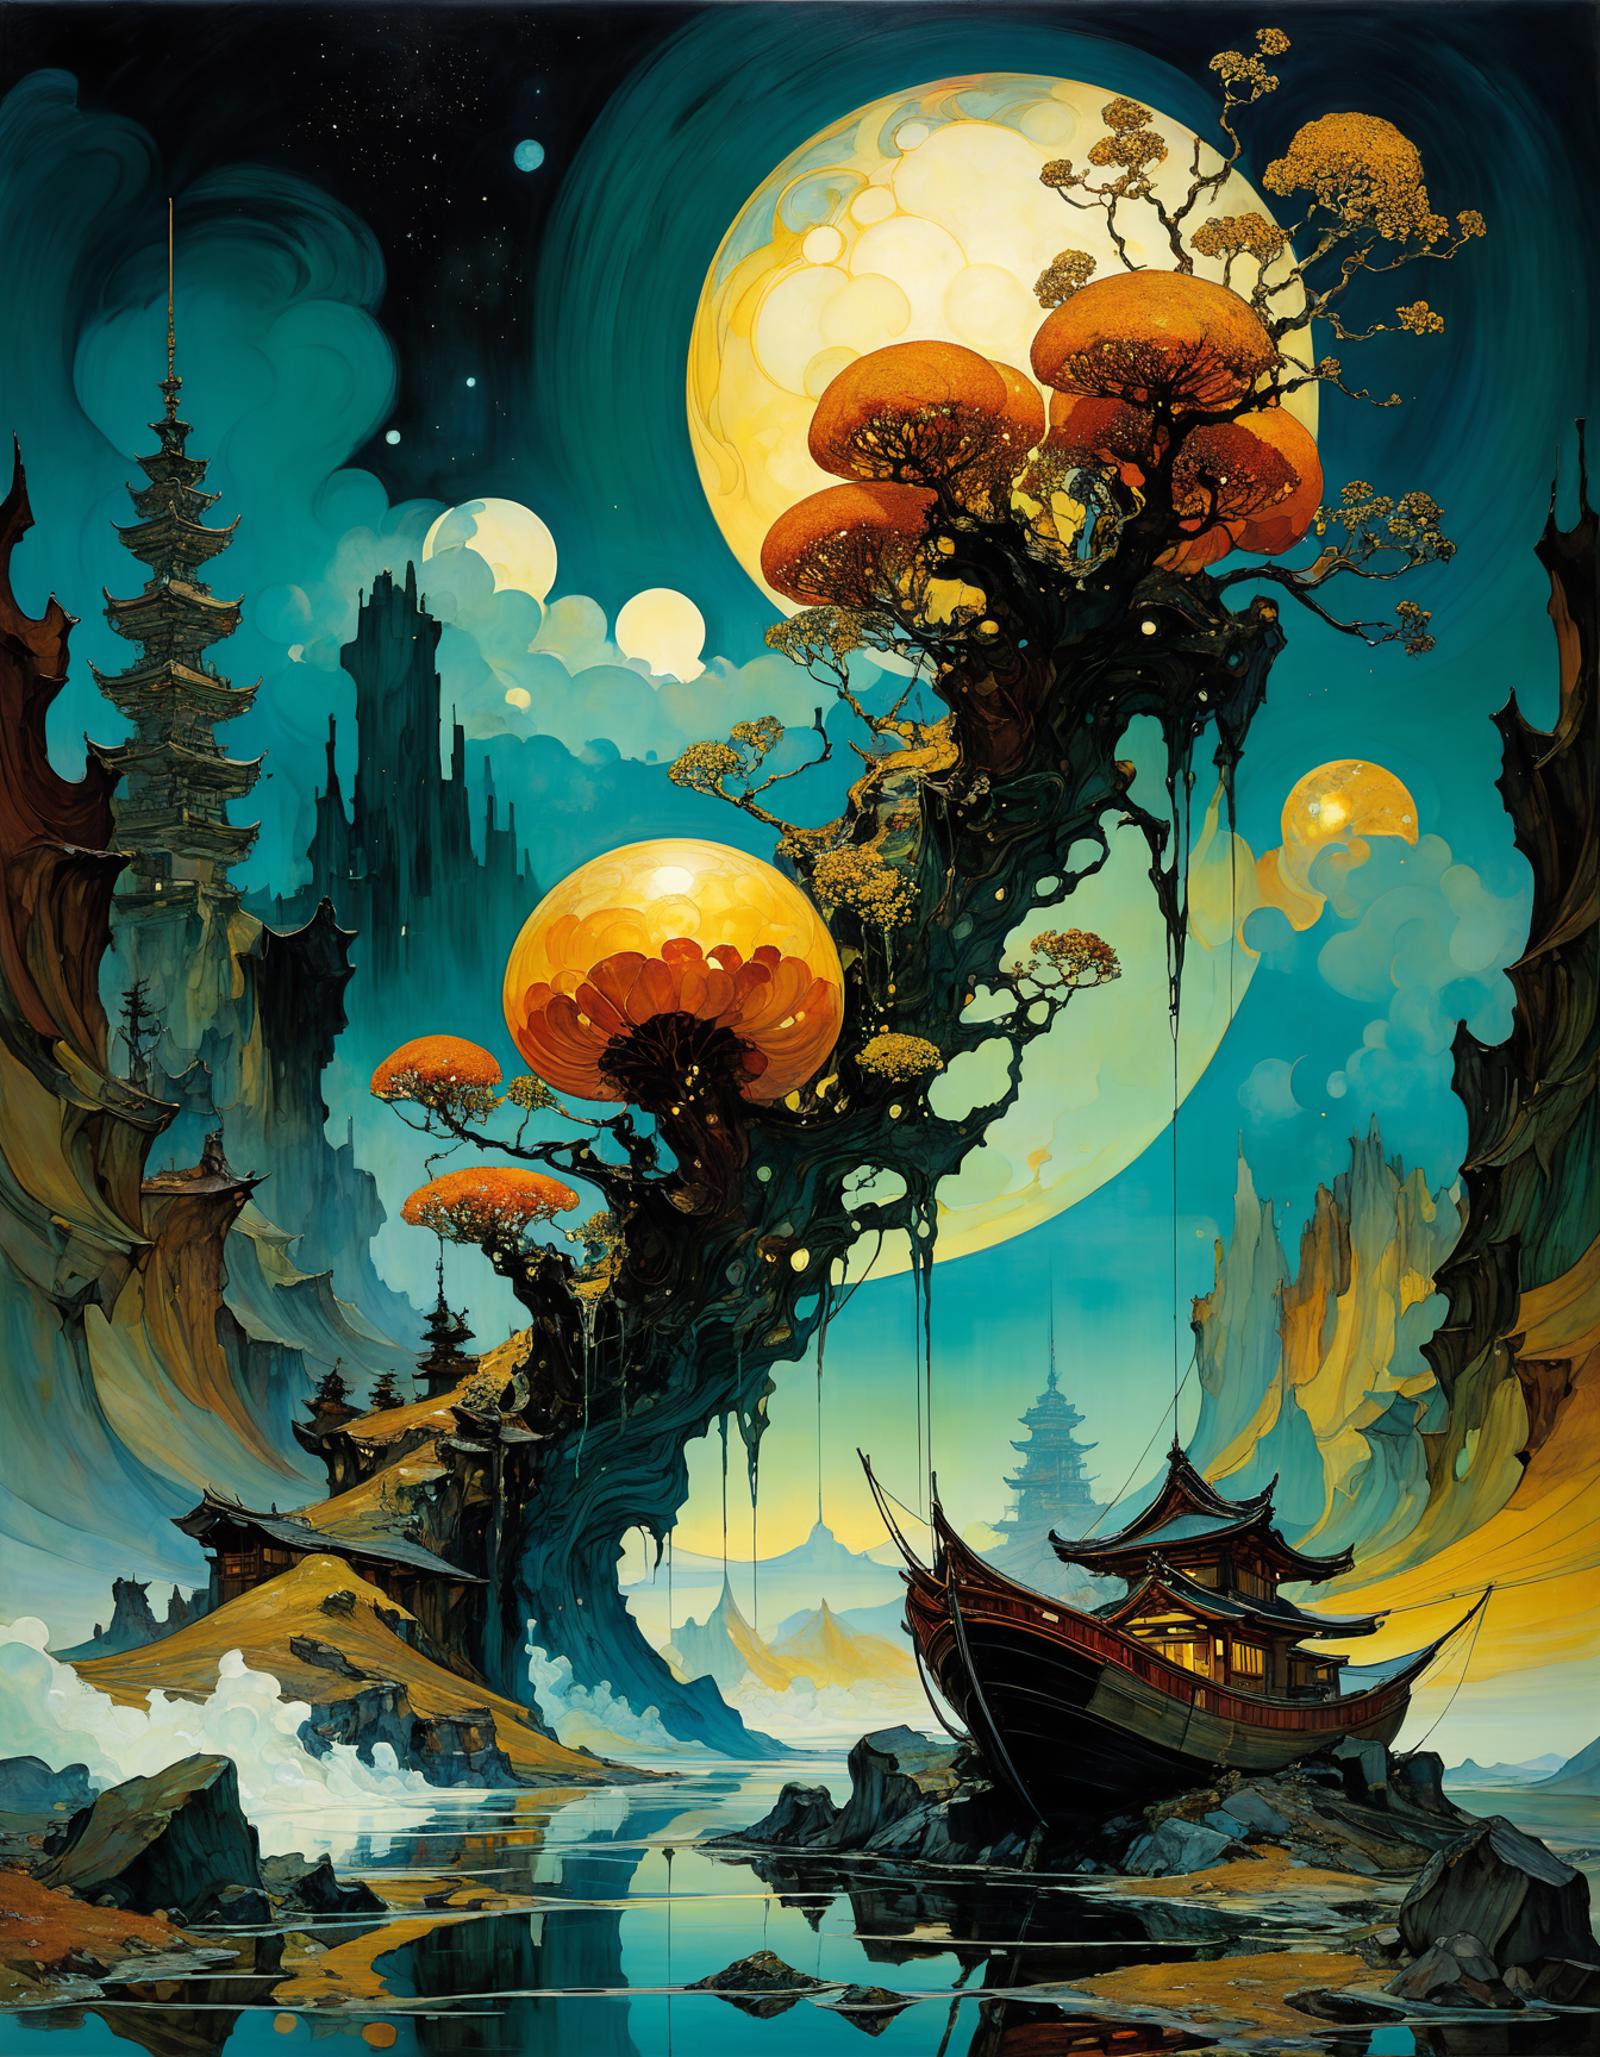 A painting of a boat with a mushroom tree in the background. The boat is docked next to a large mushroom and a small one is floating nearby. The scene is set at night with a moon visible in the sky. There are also two other smaller mushrooms in the background, creating a captivating and imaginative environment.